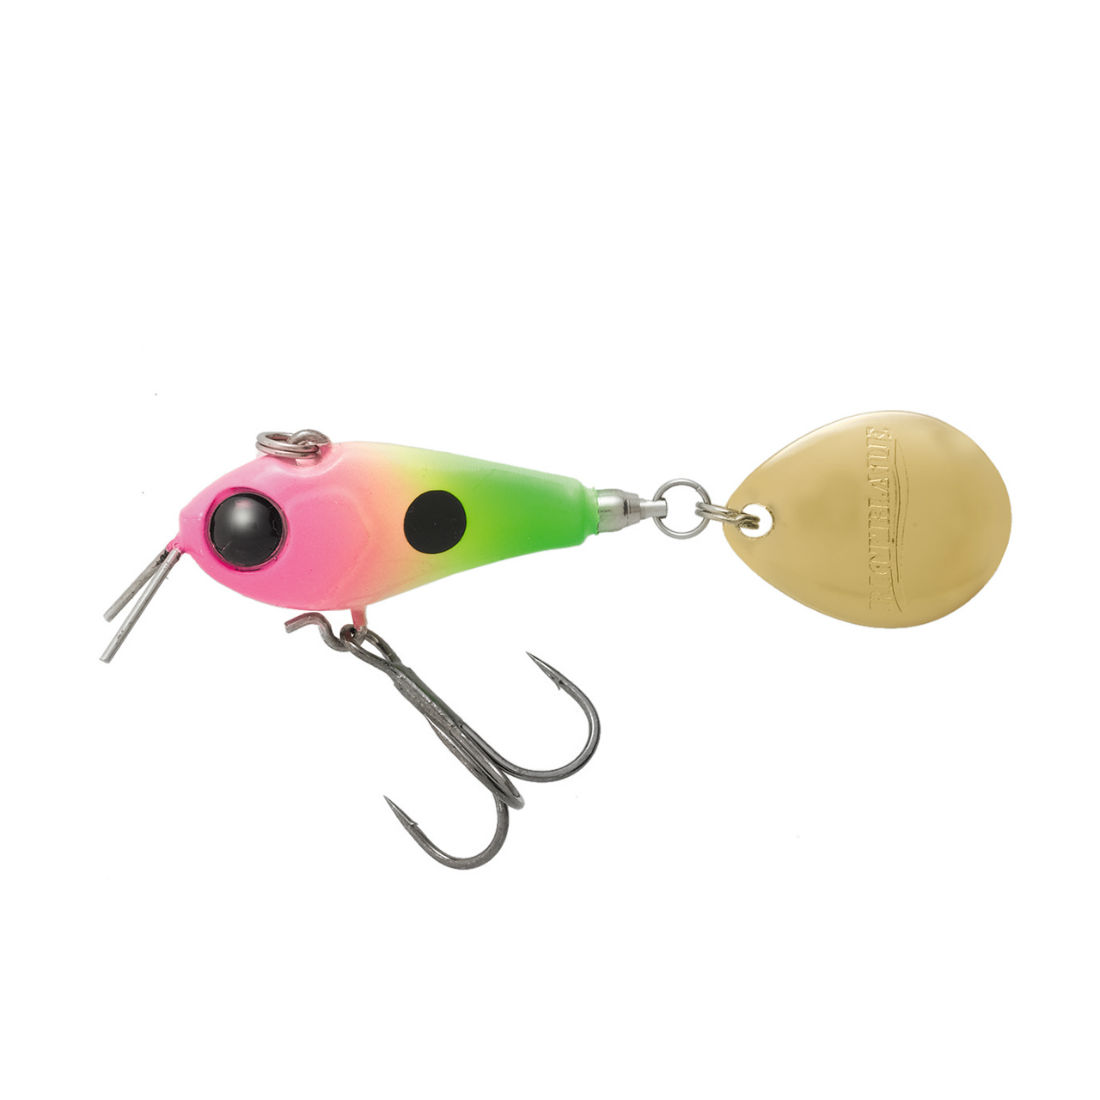 SPINNERTAIL TIEMCO RIOT BLADE S 30mm 14gr 13 Pinky Lime Chartreuse